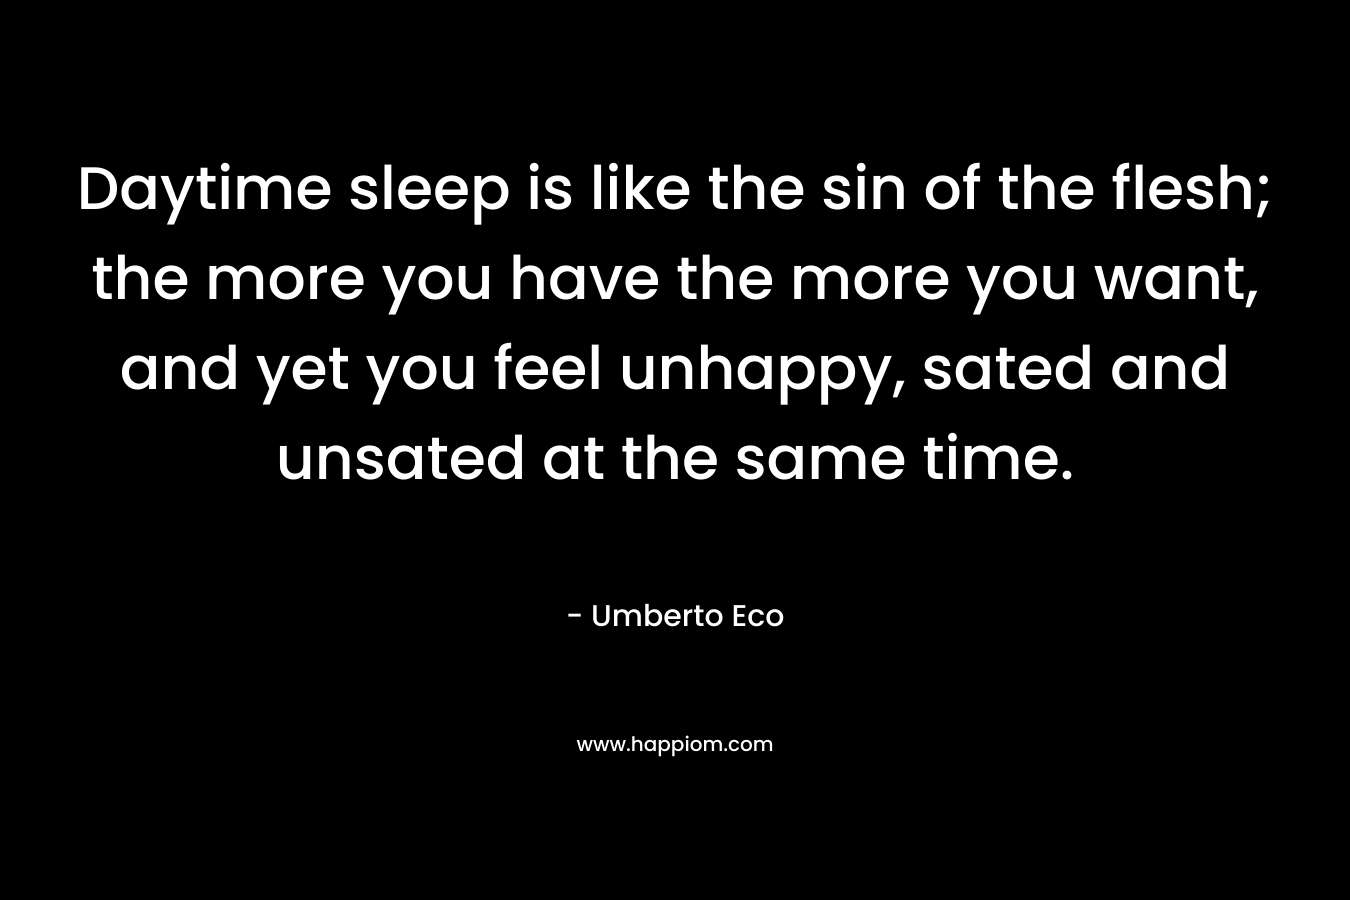 Daytime sleep is like the sin of the flesh; the more you have the more you want, and yet you feel unhappy, sated and unsated at the same time. – Umberto Eco